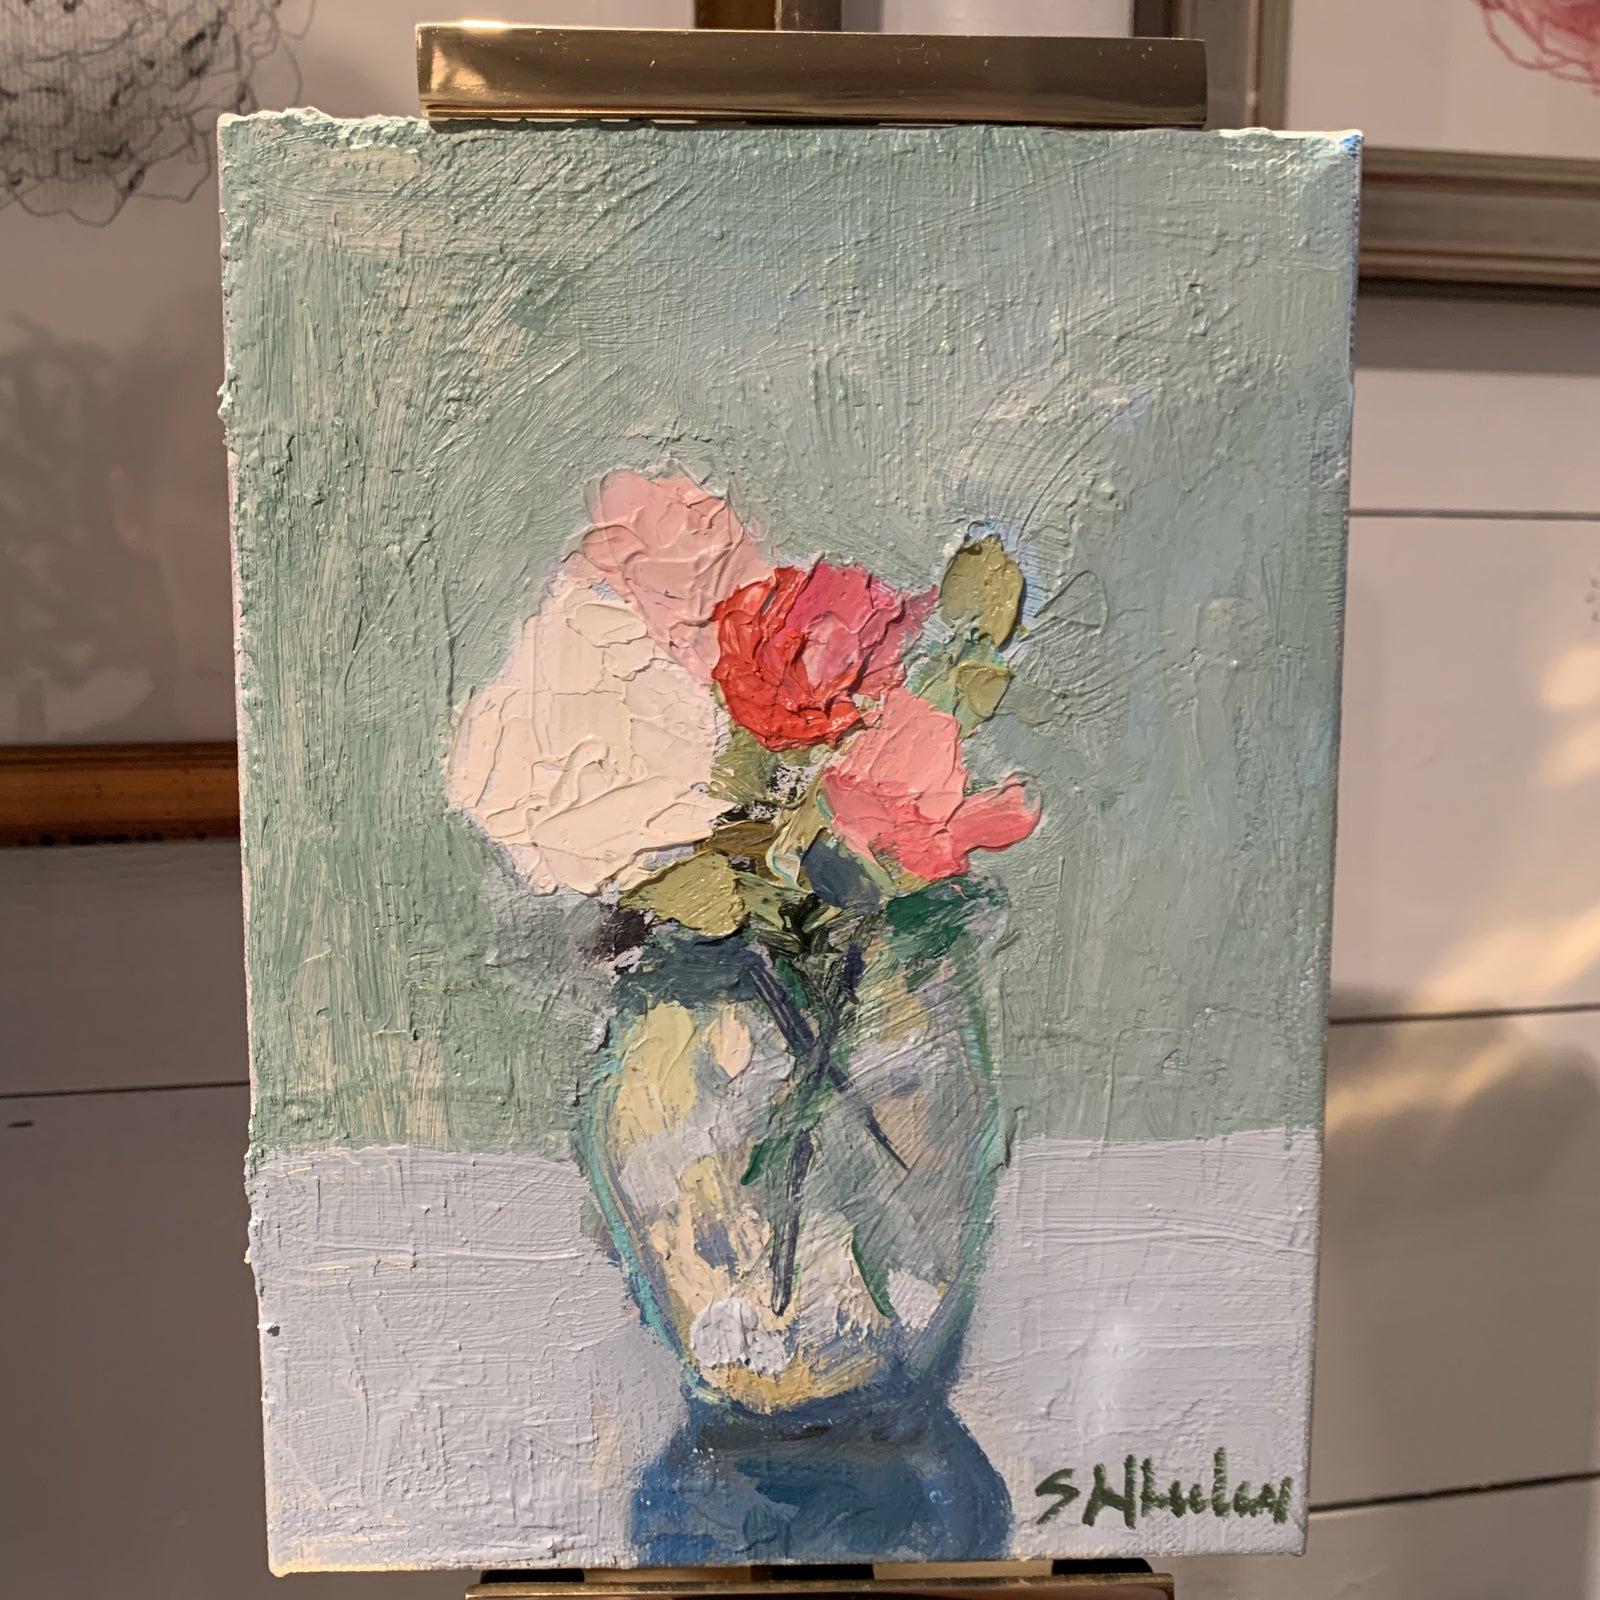 Corals, Blues, Greens and Whites
These mini florals by Stephanie Wheeler are so beautiful! They look great unframed, framed or on this gold brass adjustable easel ( available for purchase)
Great gift! Great for any style home.

Somewhere between